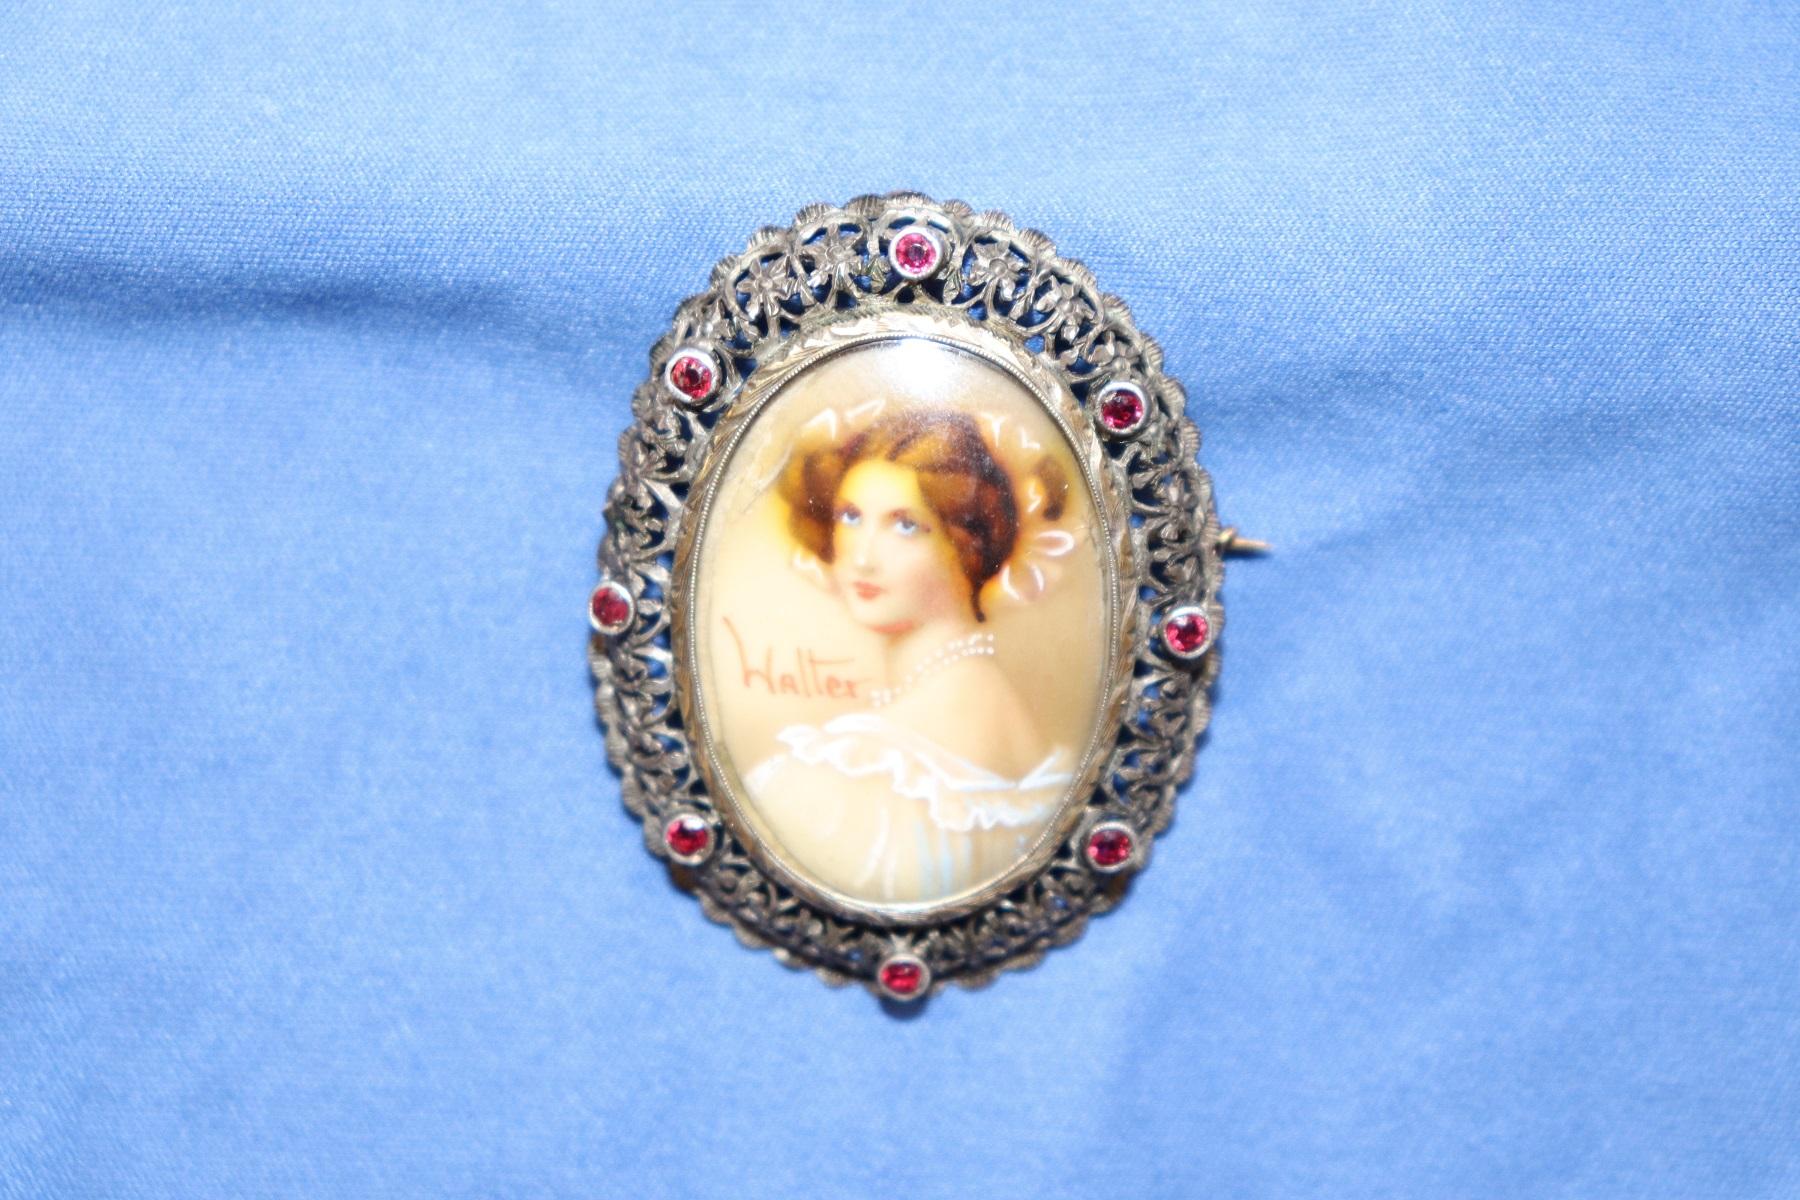 Elegant Art Nouveau oval brooch with gold and silver filigree embellished with eight red ribbons. In the centre a portrait of a young miniature woman painted by hand with a brush tip. Extremely refined painting signed by the artist Walter.
Weight